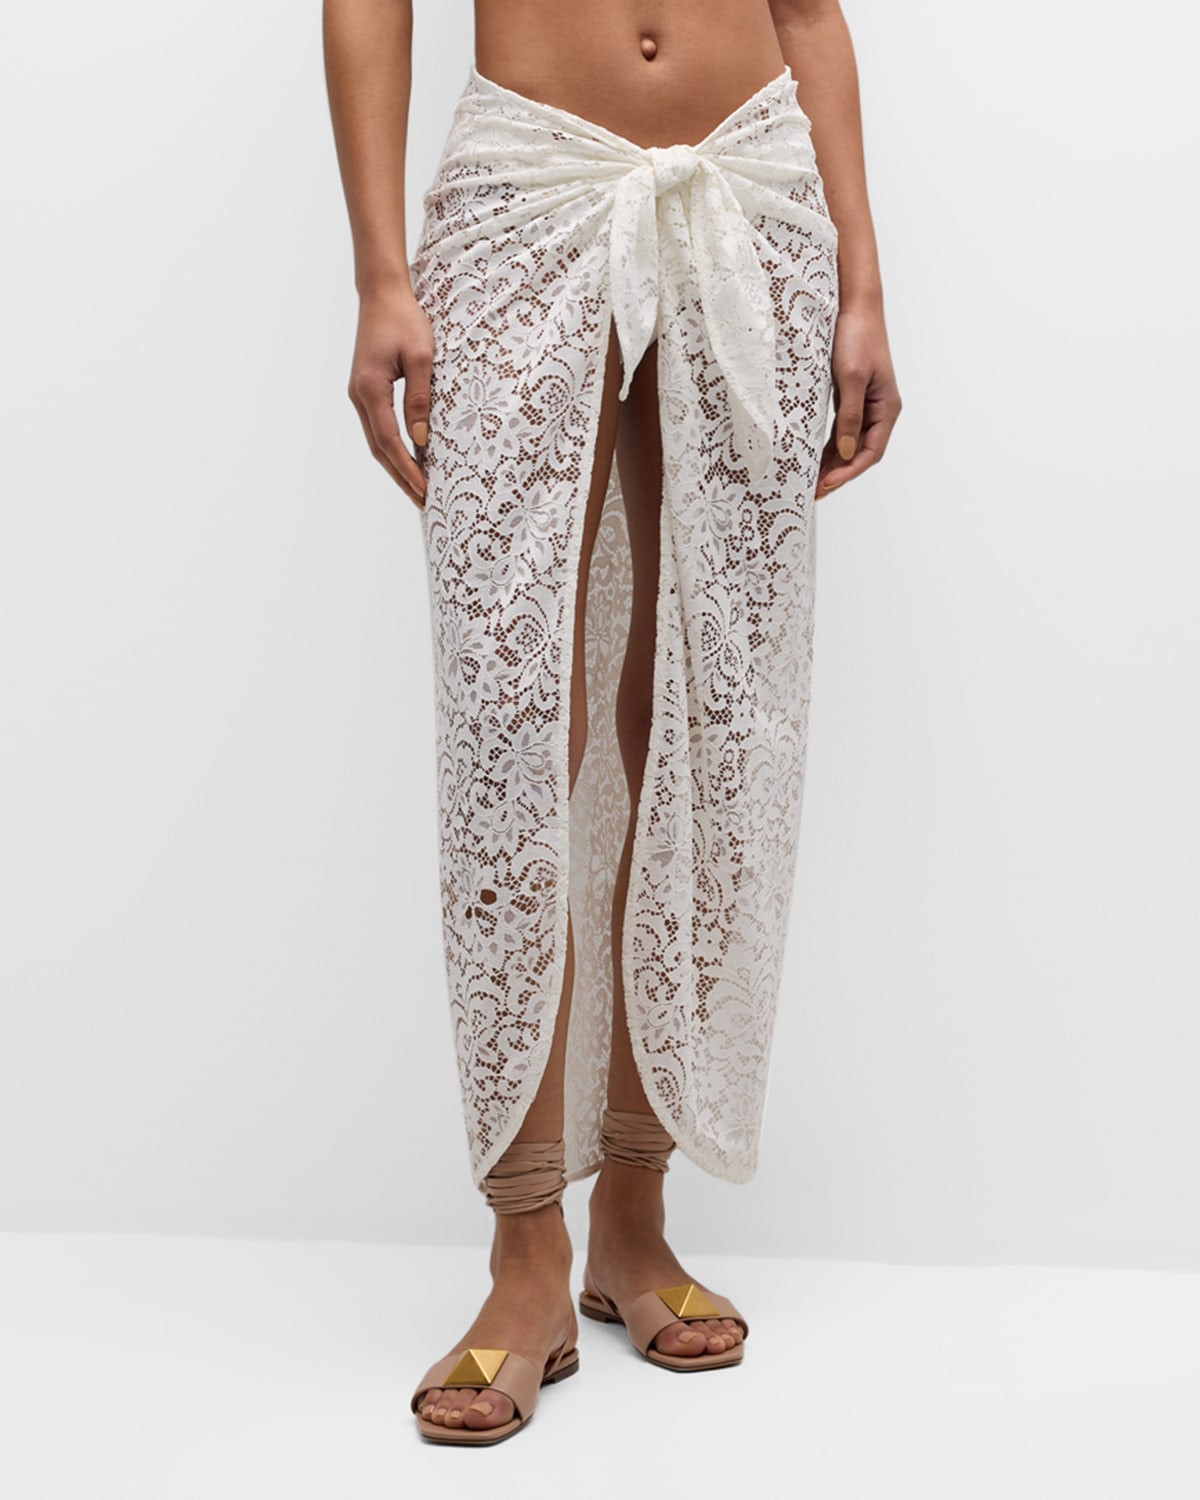 Stylest Aqualace Quick-drying Pareo Coverup In Floral Lace Blanc